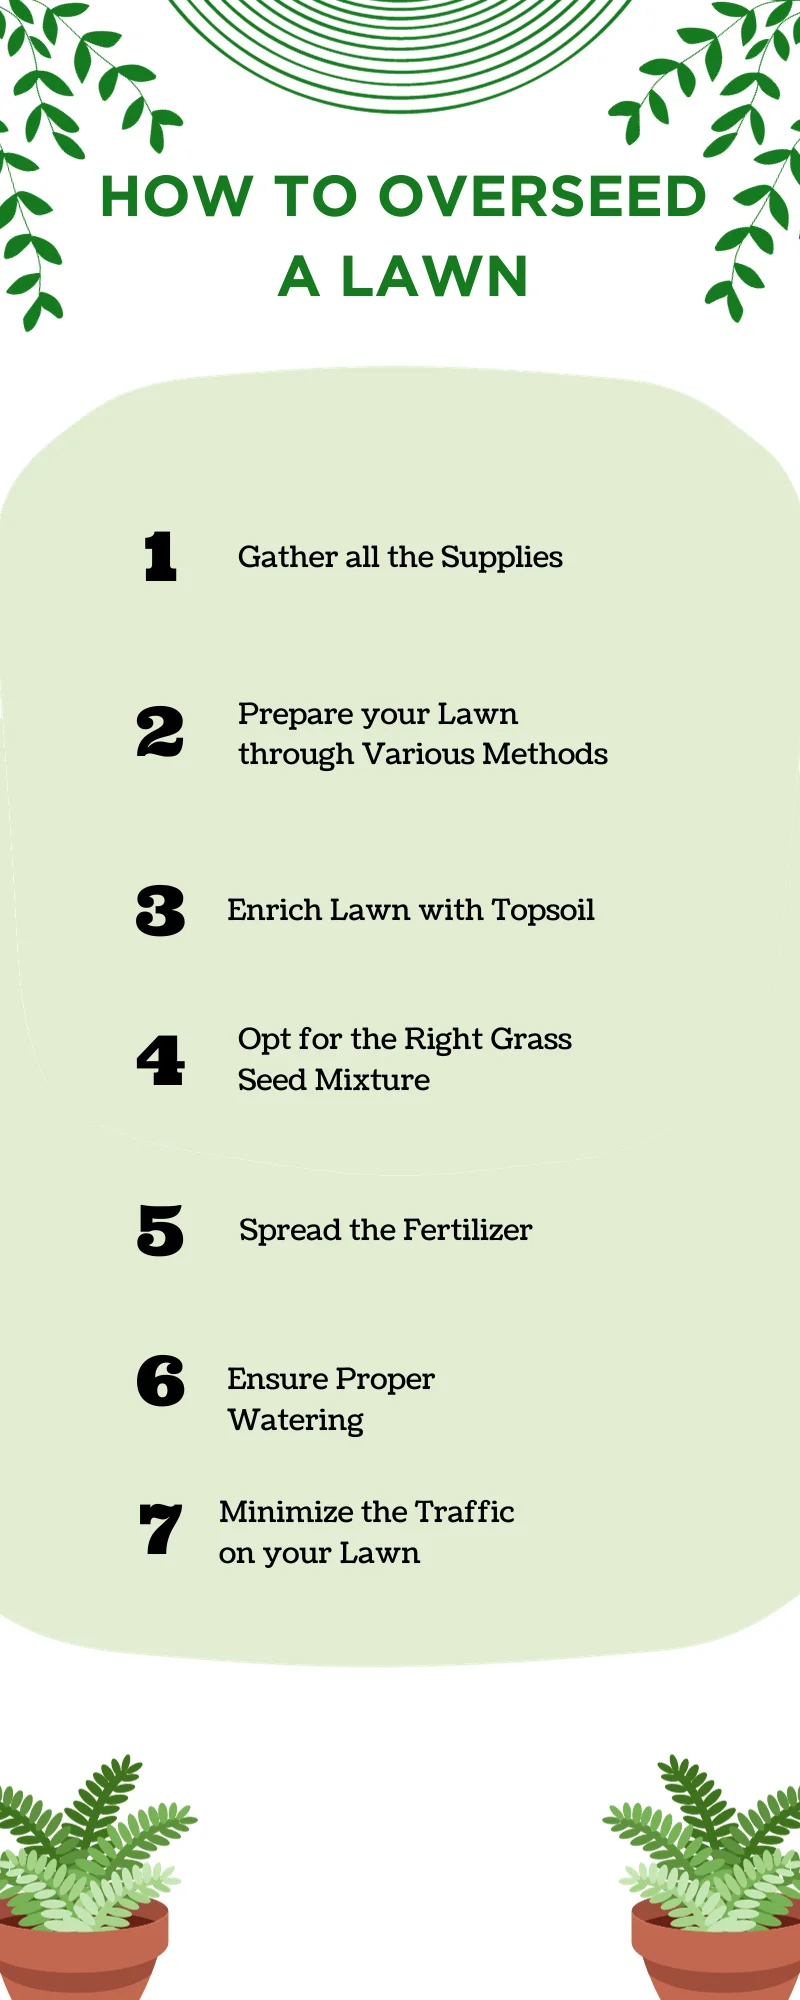 An infographic on how to overseed a lawn